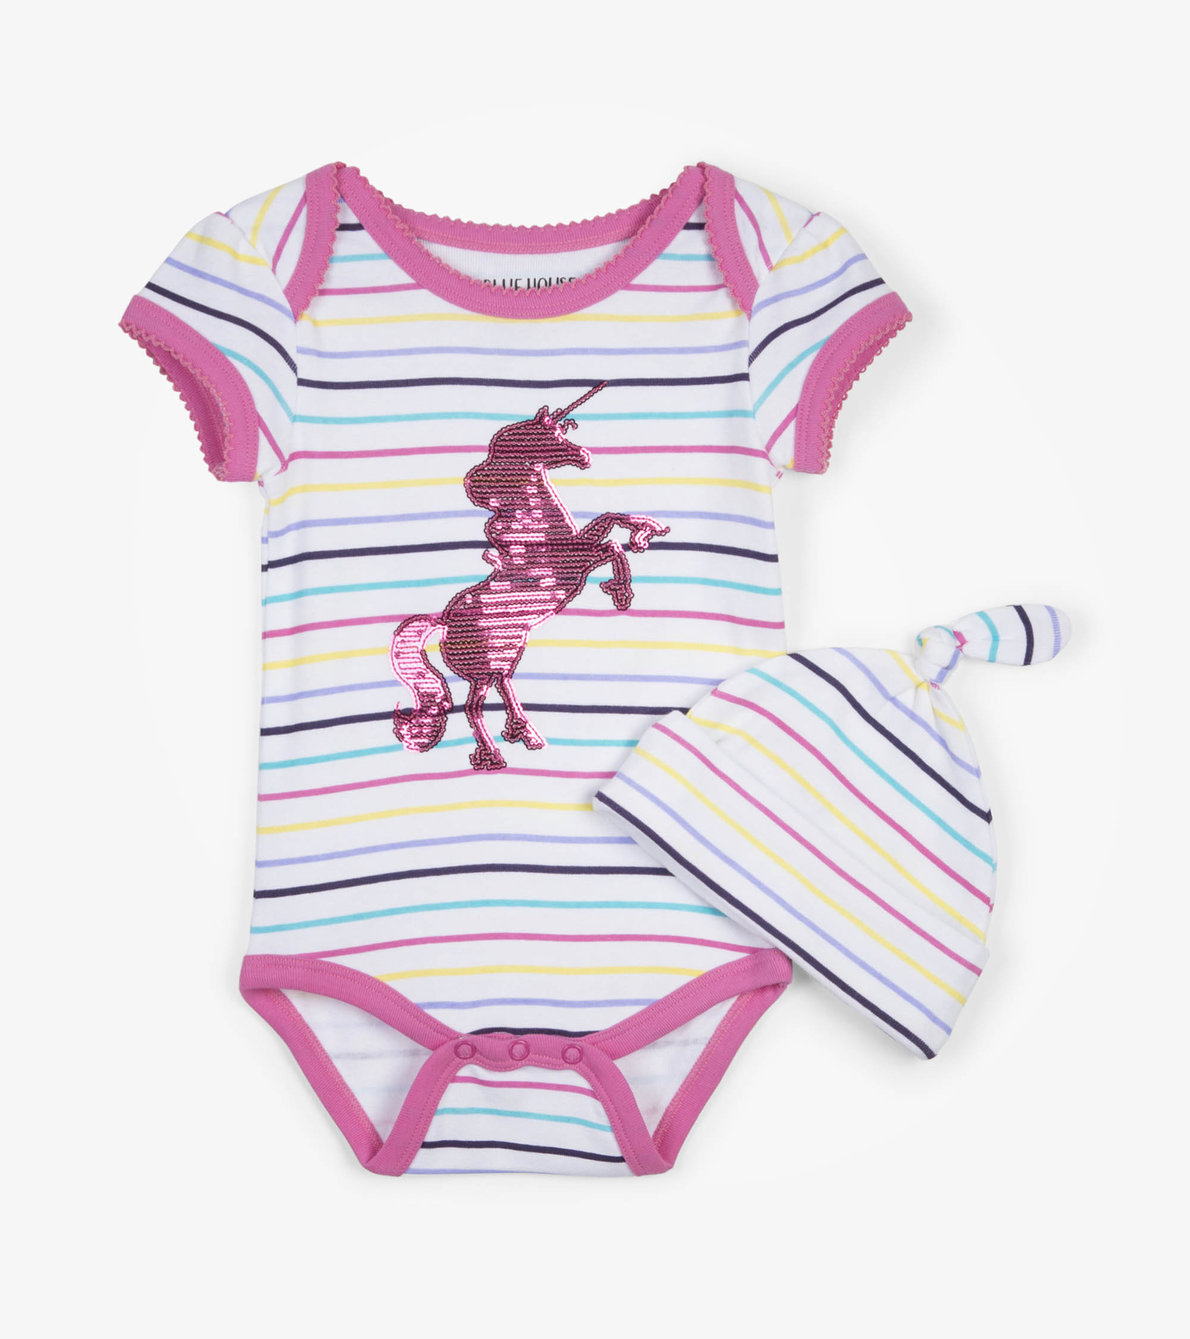 View larger image of Rainbow Unicorn Baby Bodysuit with Hat